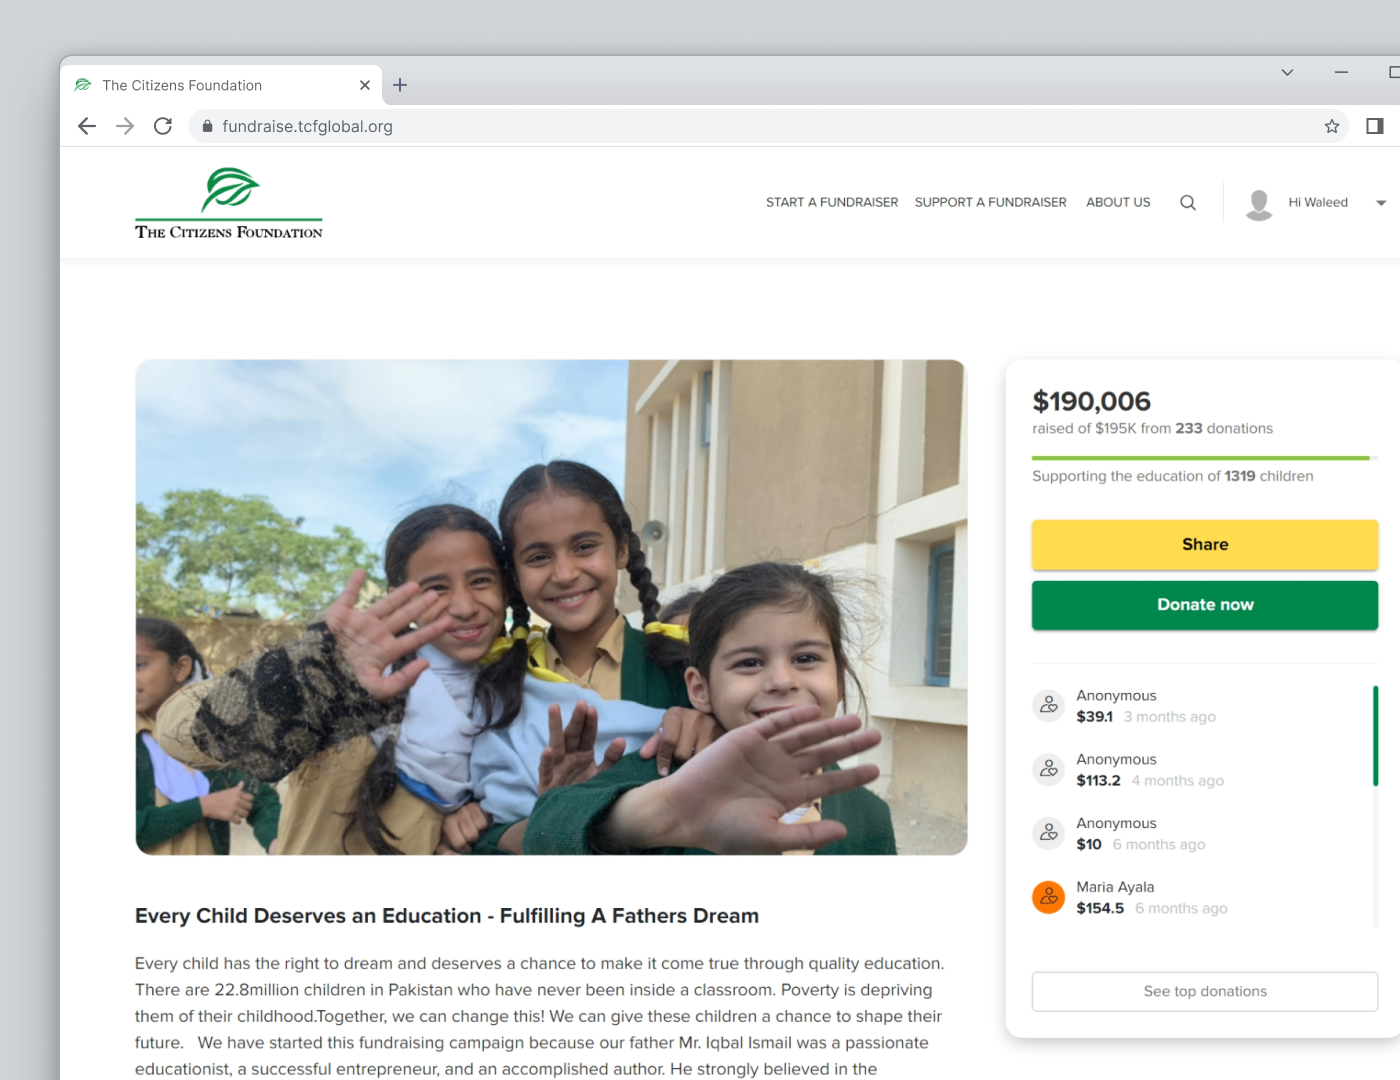 screenshot of a fundraiser page on tcfglobal.org